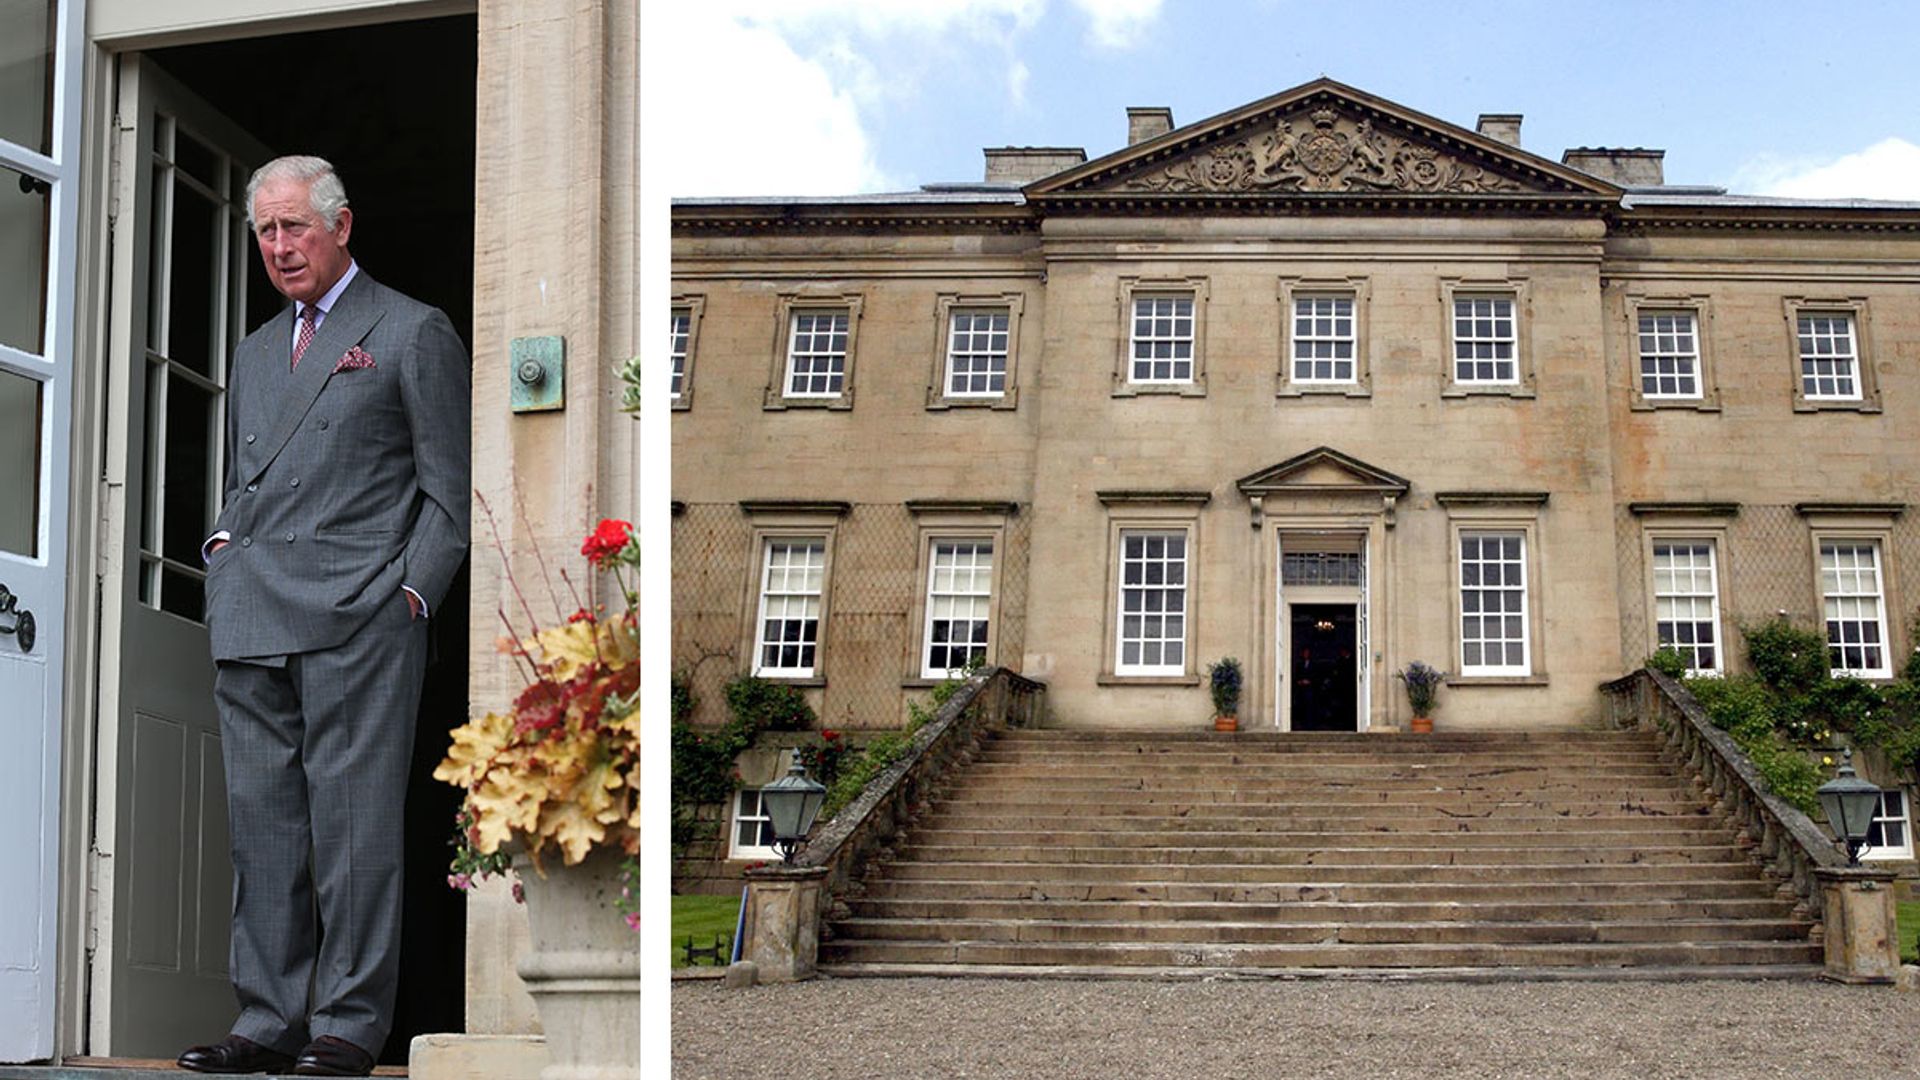 Prince Charles' wedding venue plans for Dumfries House in jeopardy